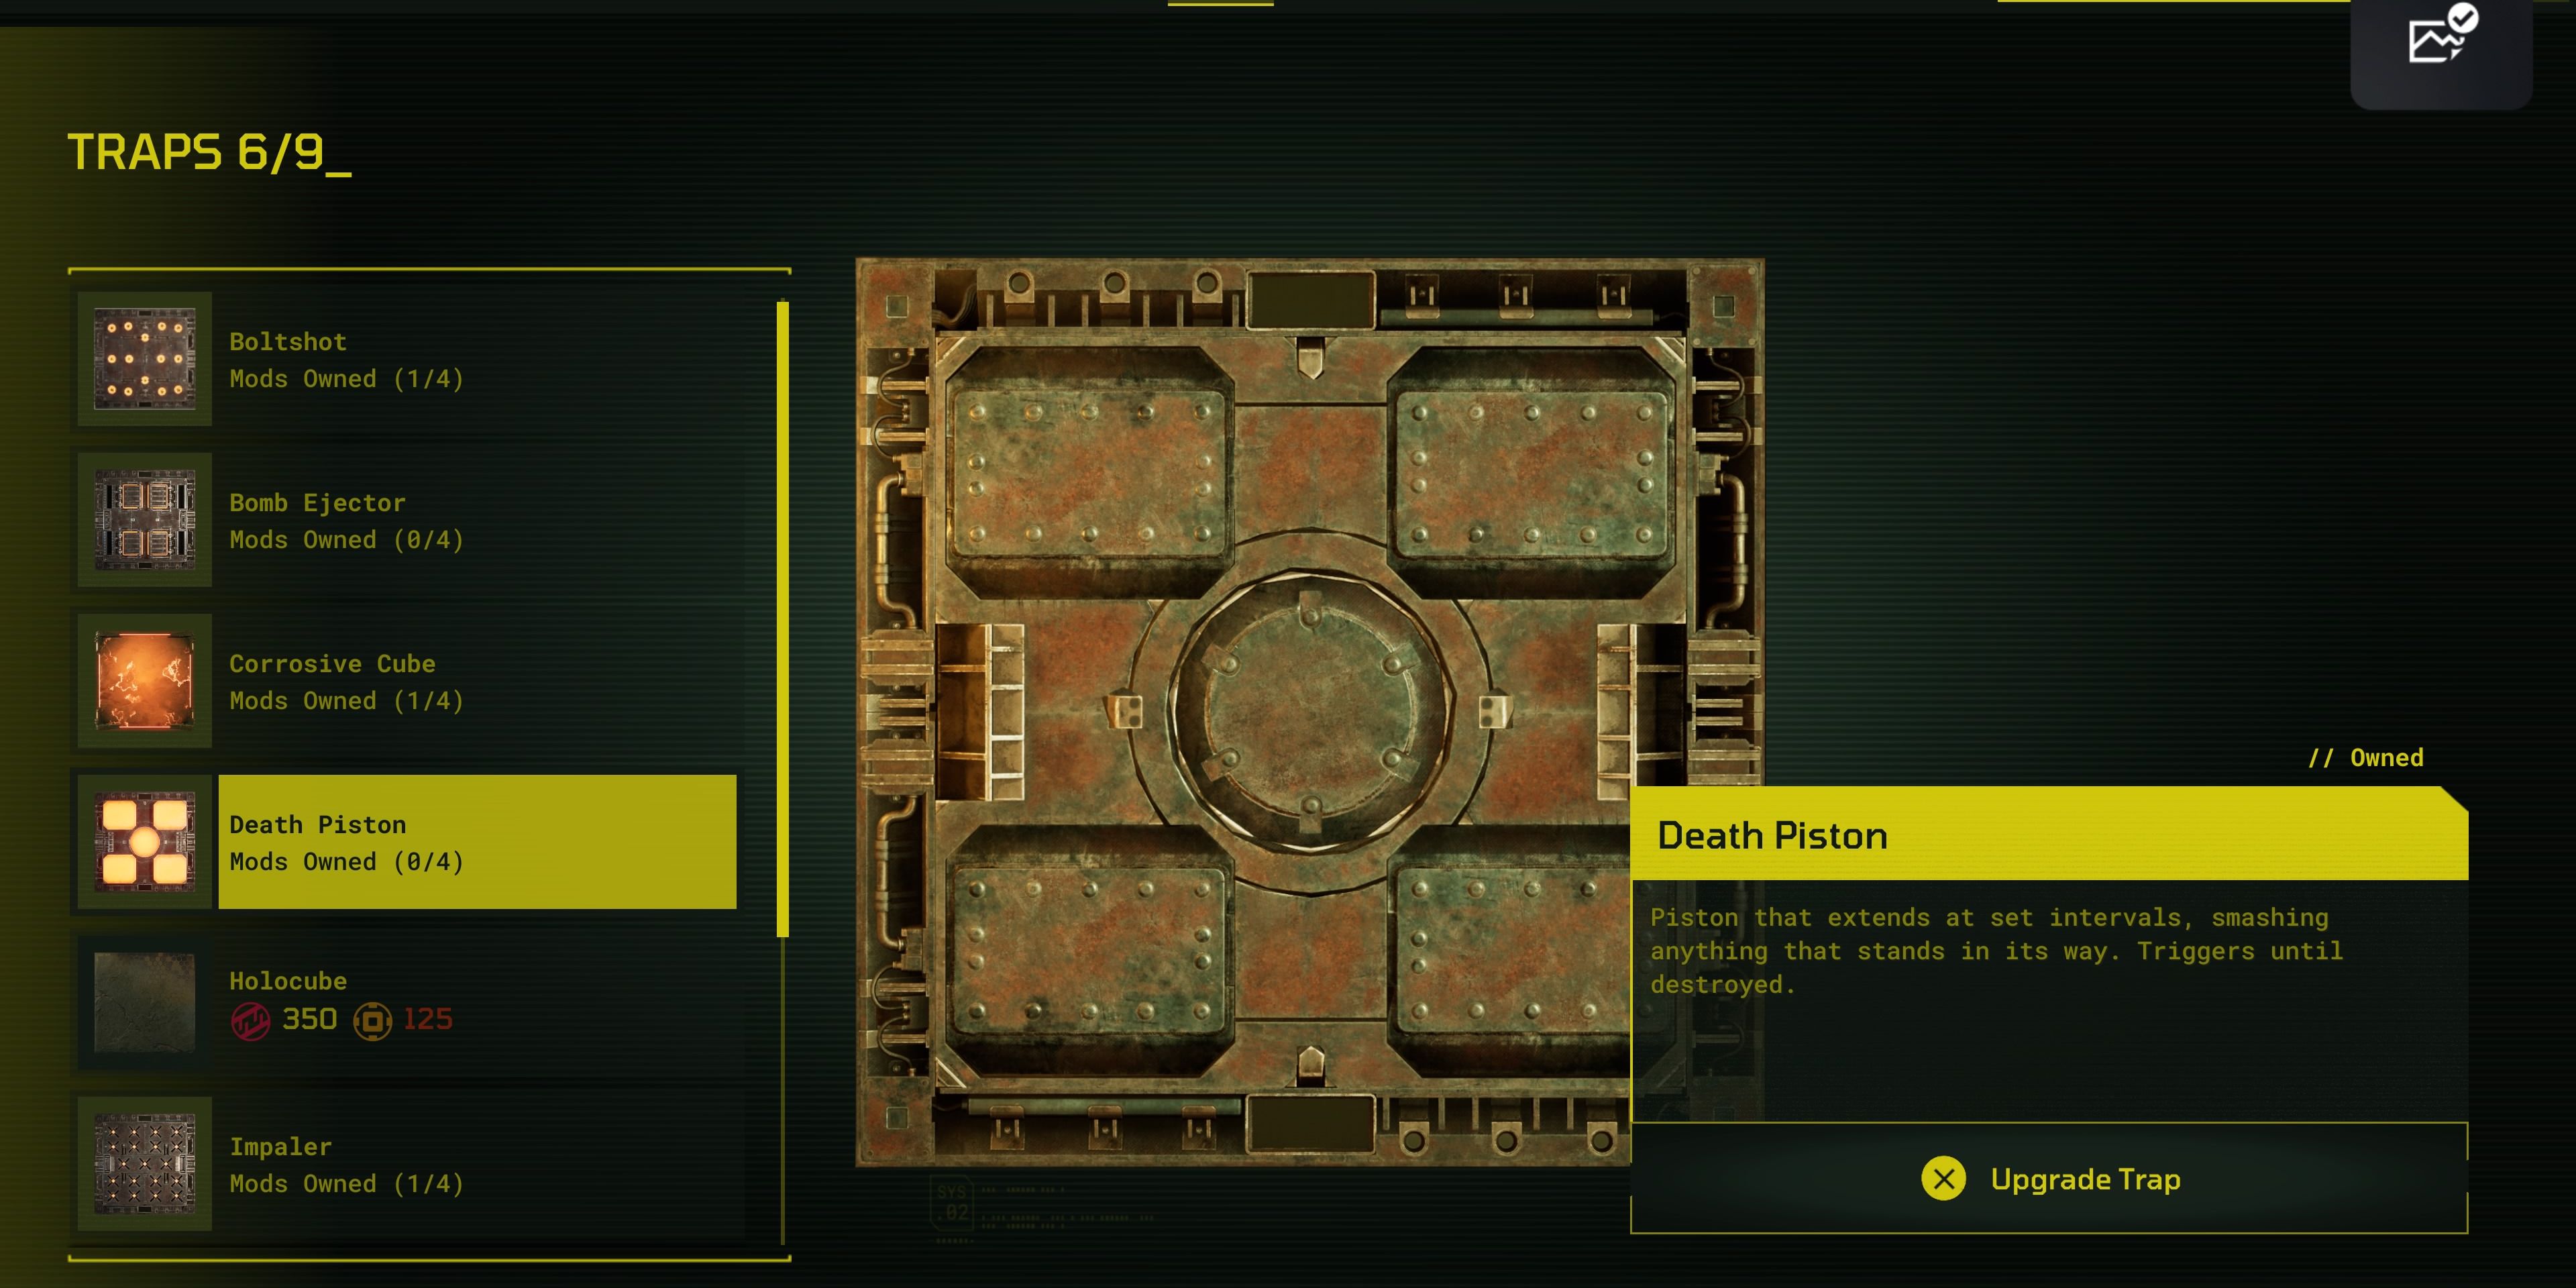 Image shows the Death Piston trap in Meet Your Maker